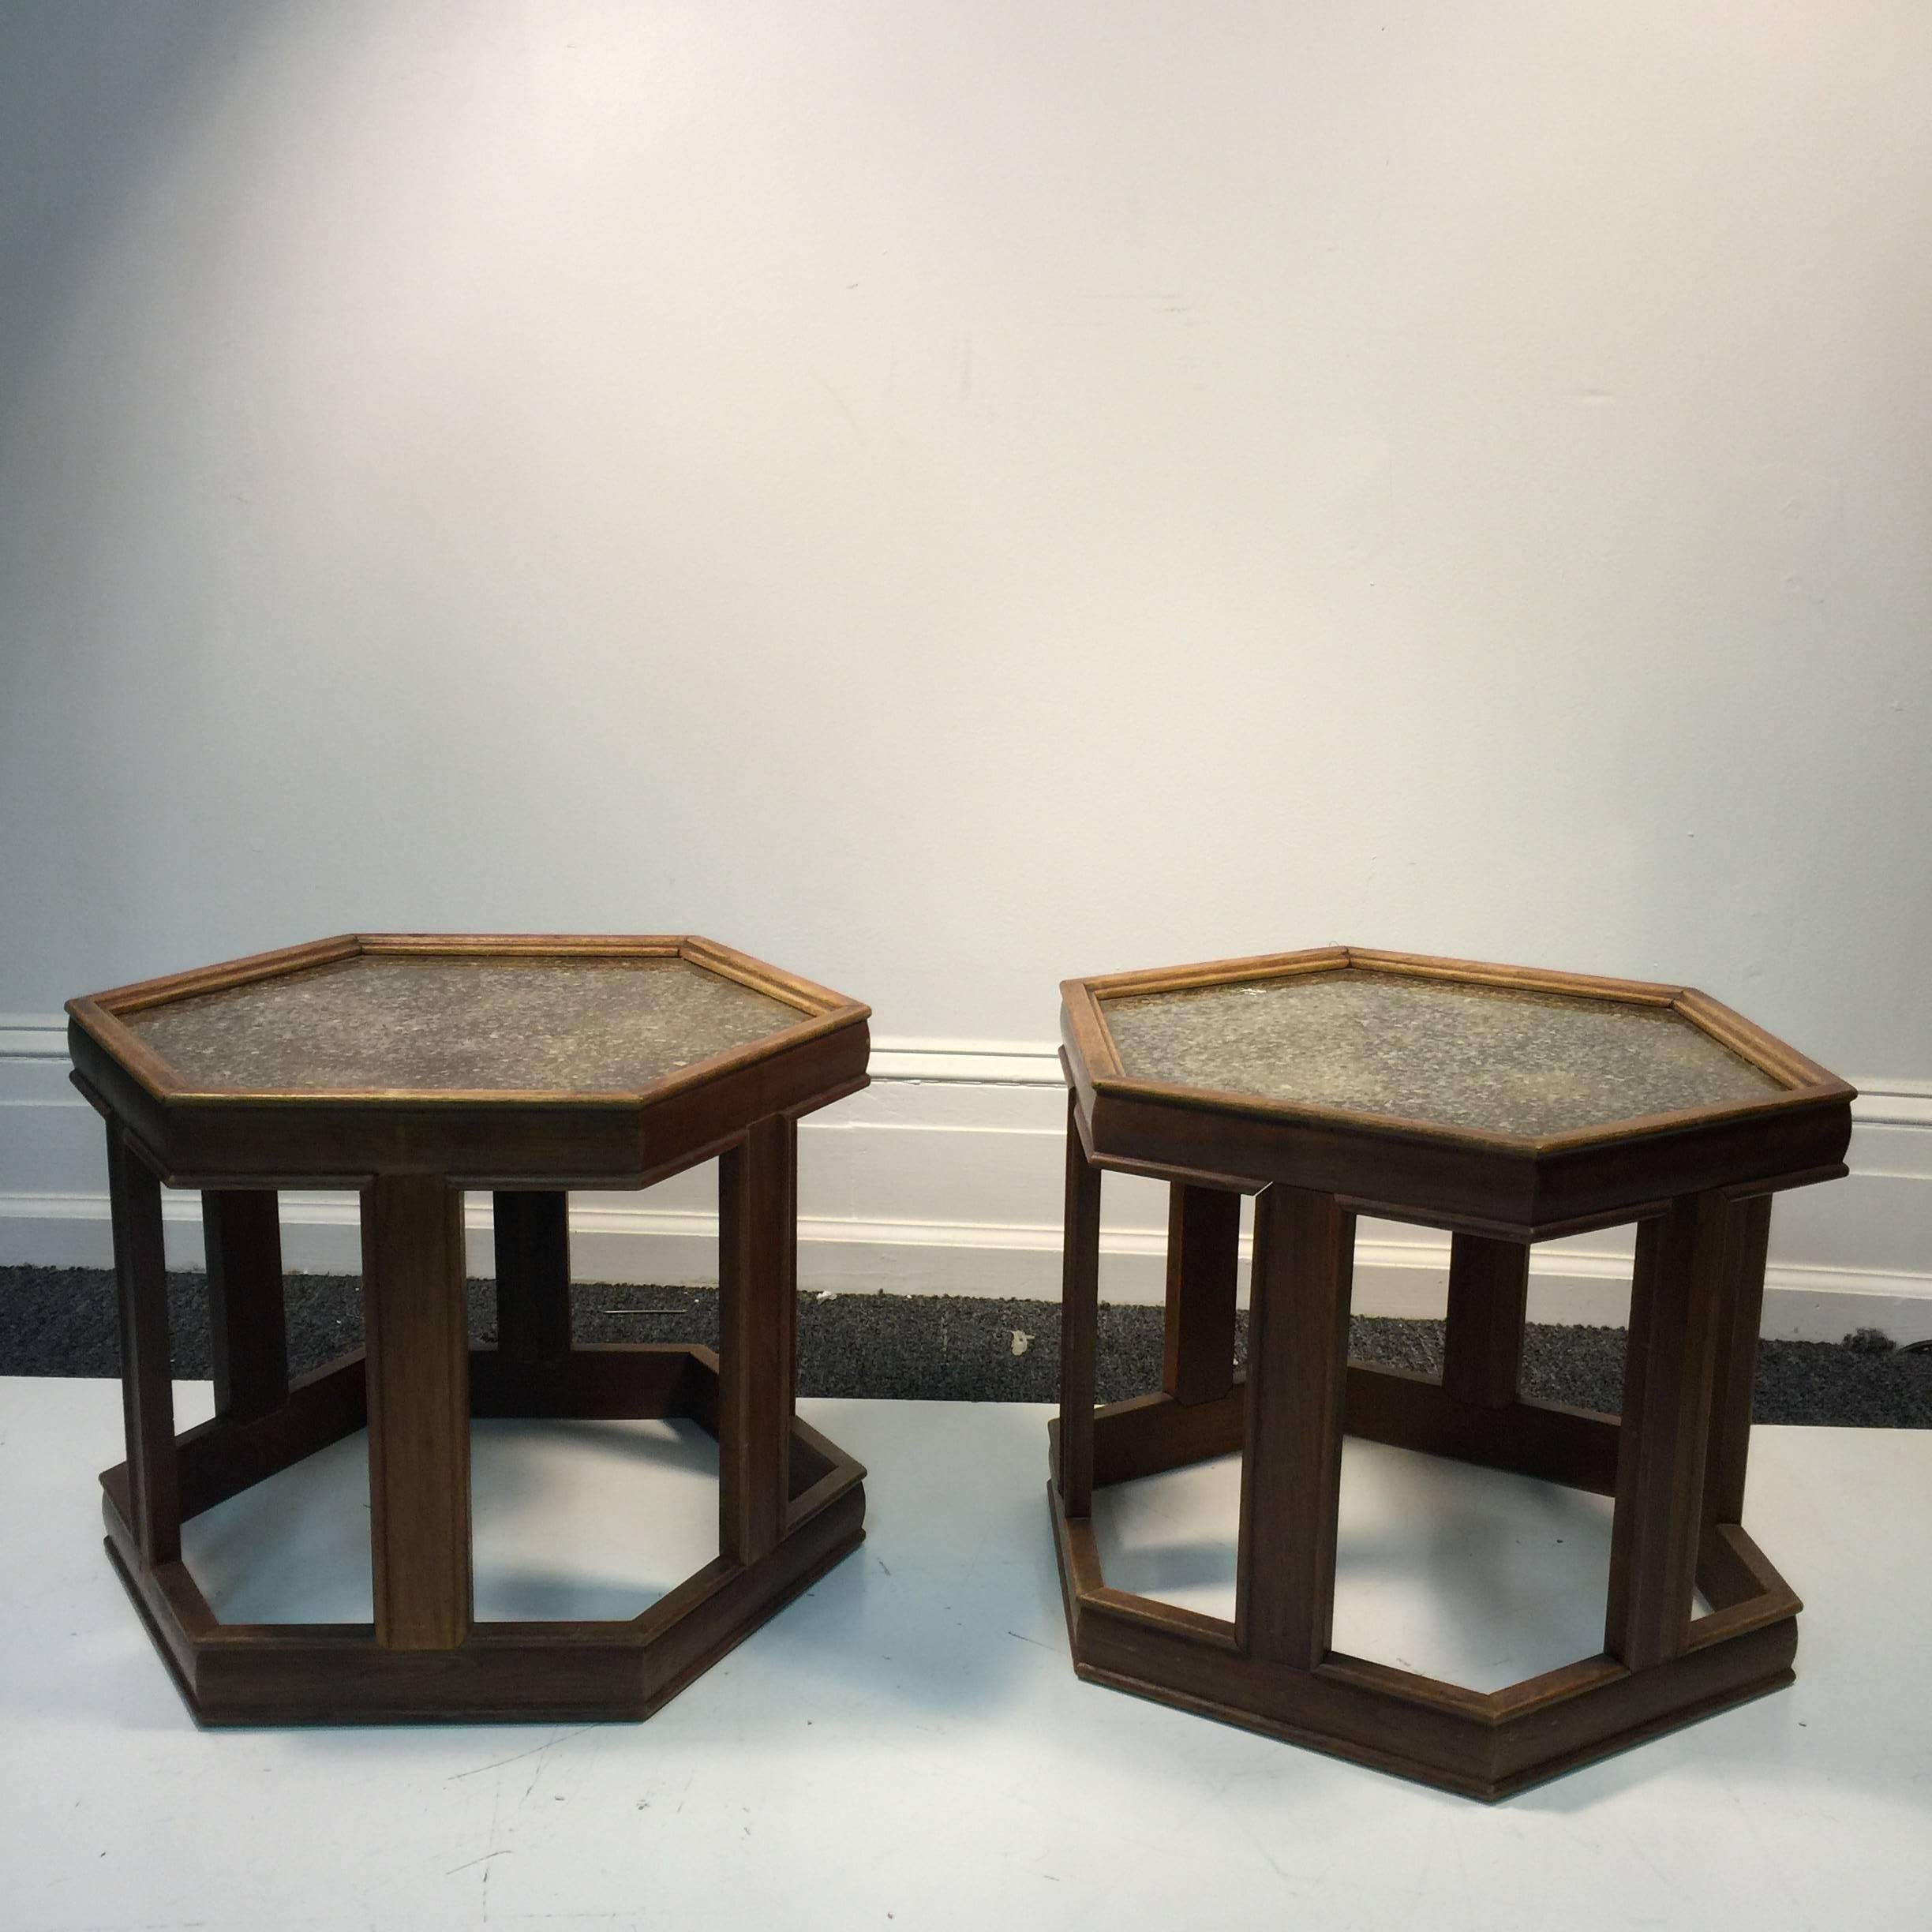 Sensational Pair of John Keal for Brown Saltman Hexagonal Tables In Good Condition For Sale In Mount Penn, PA